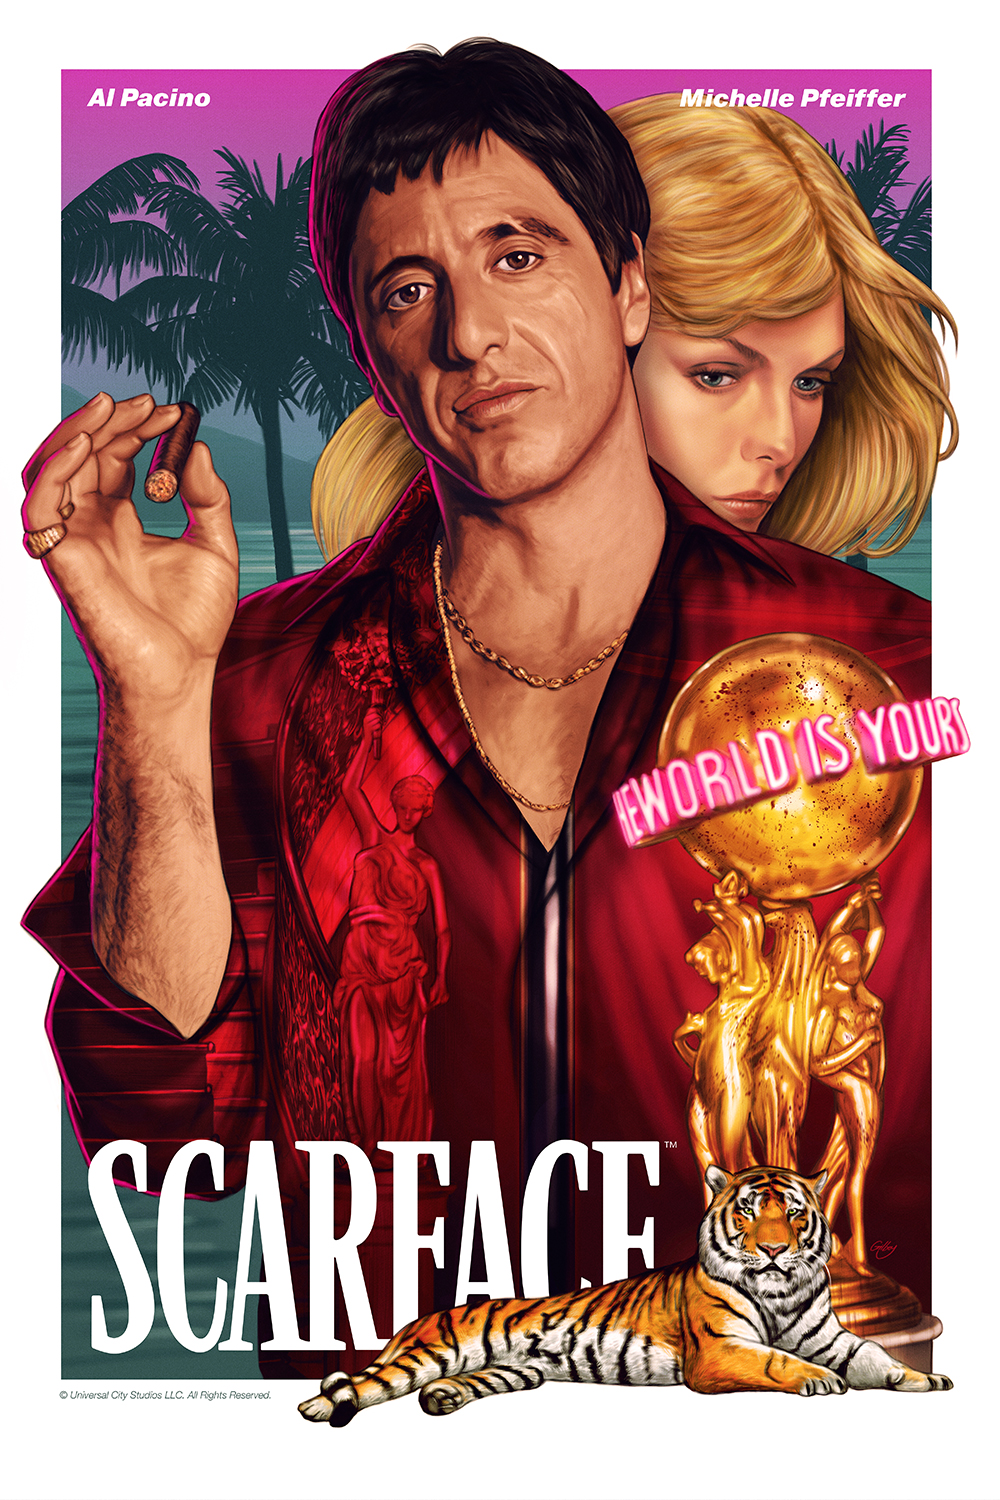 who designed the scarface poster